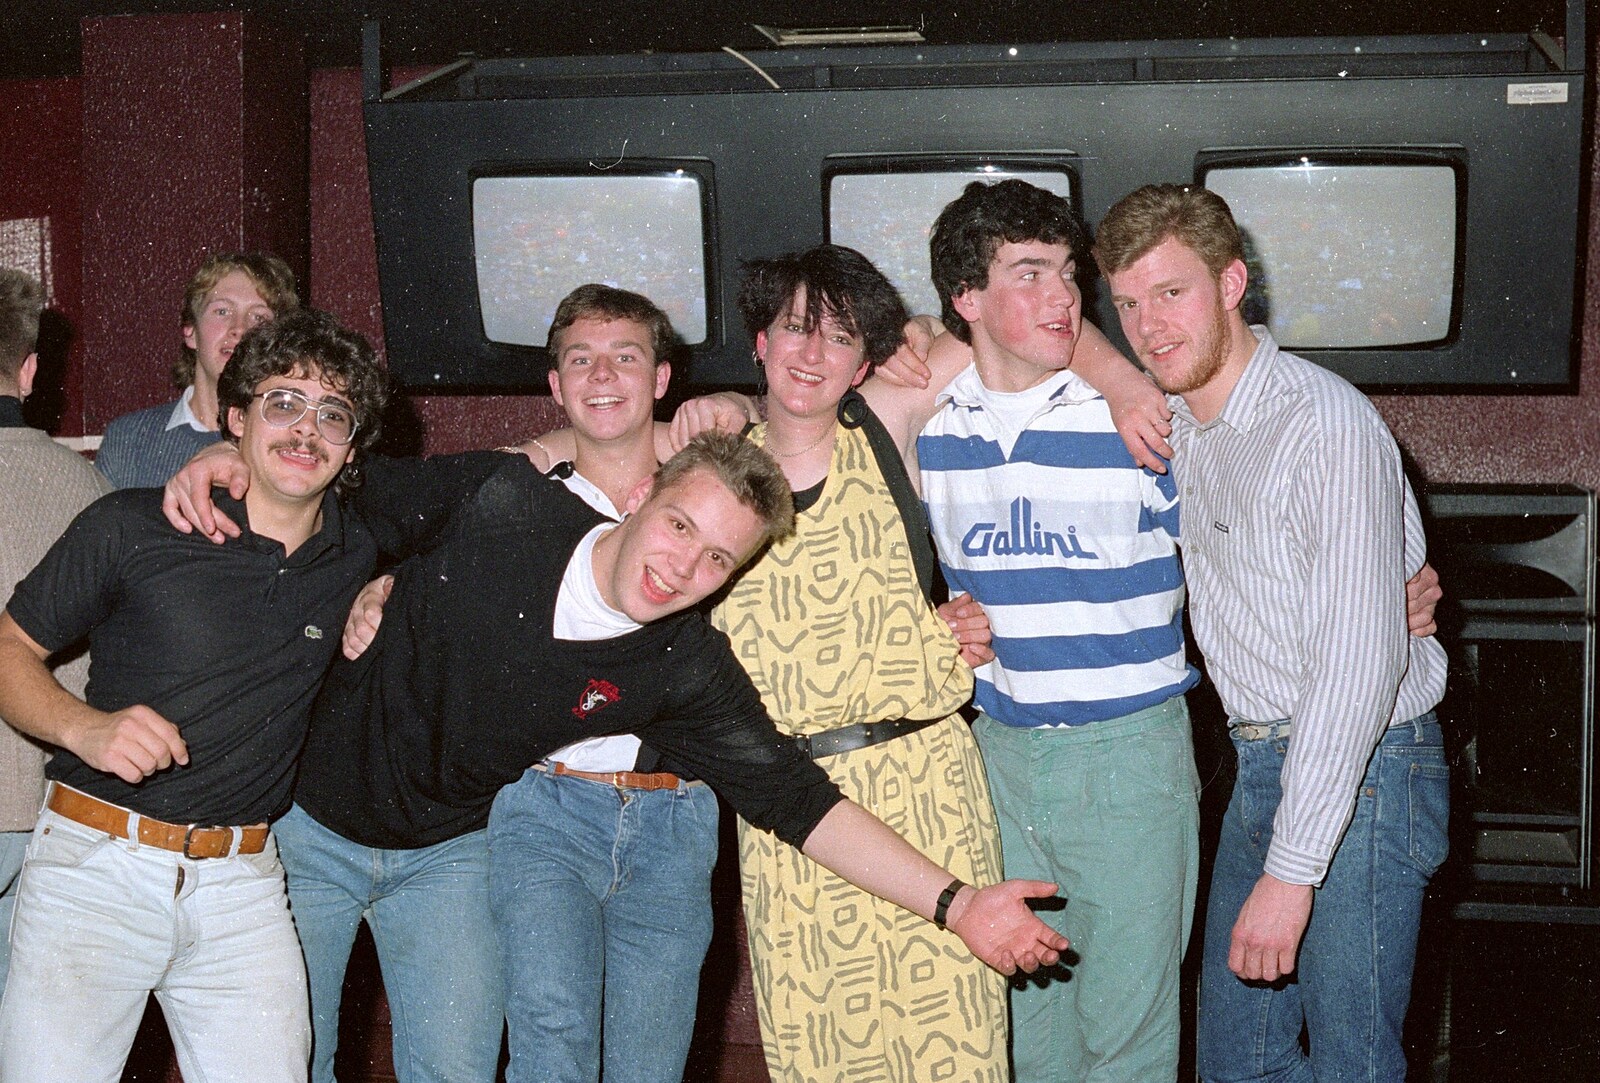 Someone with an on-trend Gallini top from Uni: A Party in Snobs Nightclub, Mayflower Street, Plymouth - 18th October 1986